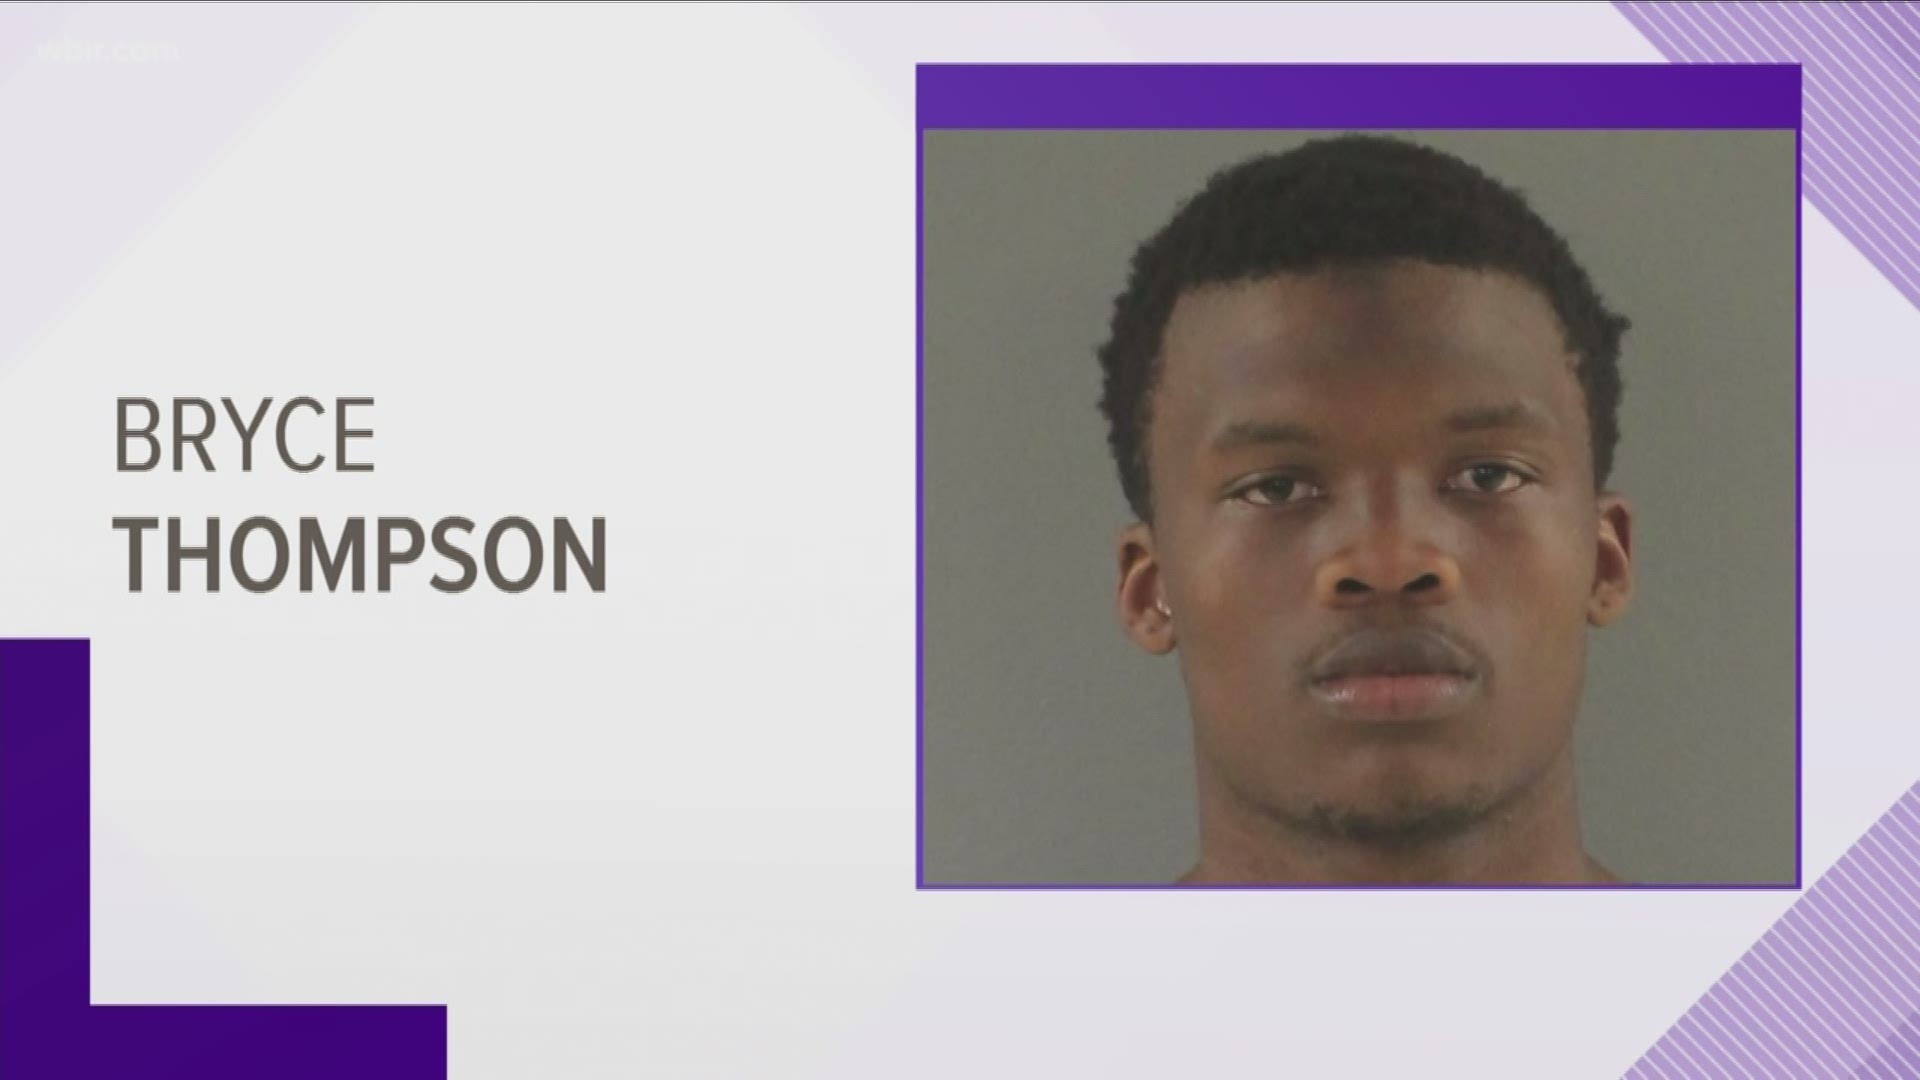 Court records show a UT football player arrested over the weekend for domestic assault has a history of domestic violence.